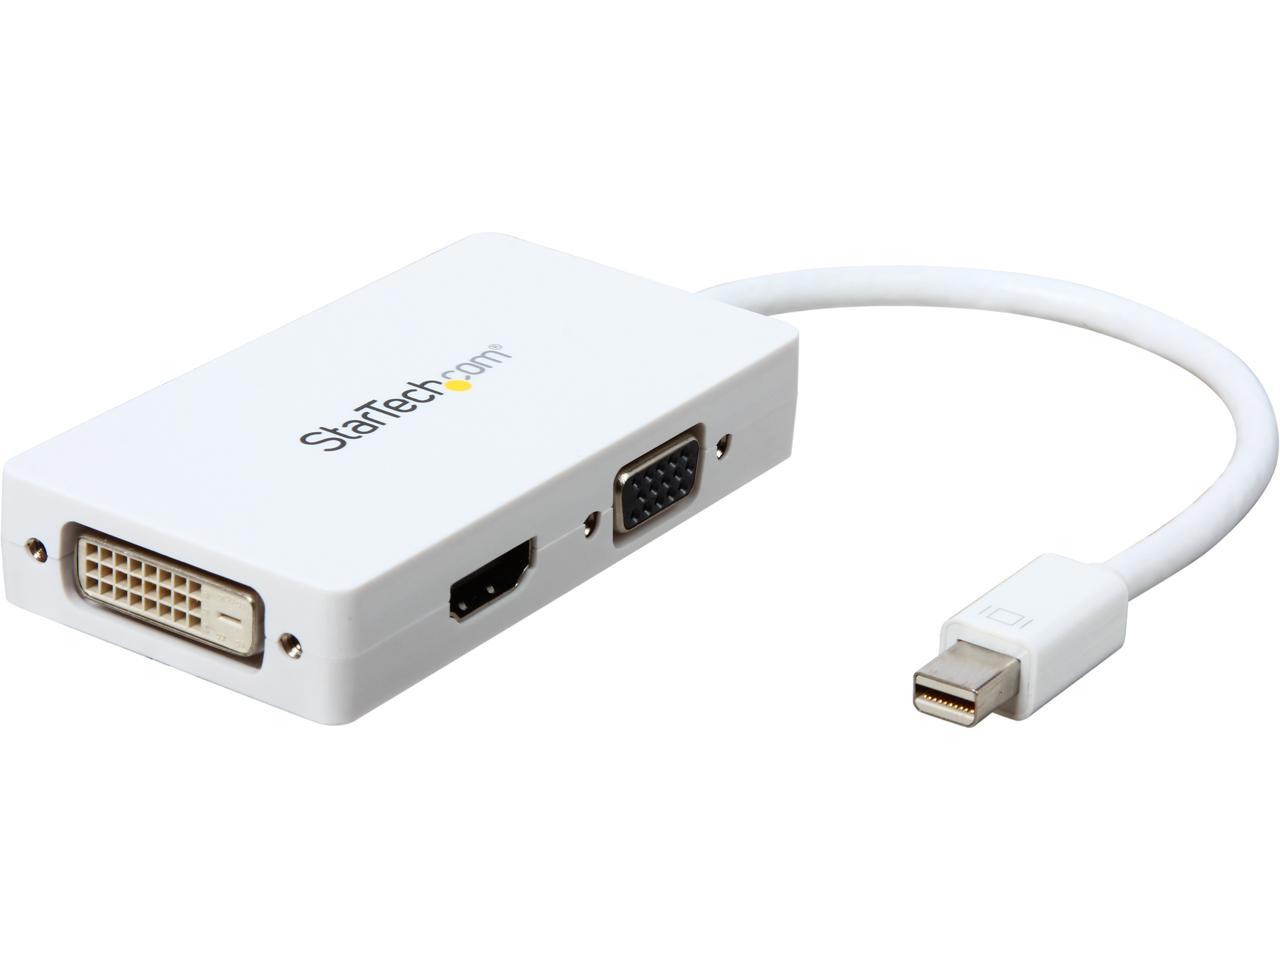 StarTech.com MDP2VGDVHDW Travel A/V Adapter: 3-in-1 Mini DisplayPort to VGA DVI or HDMI Converter - White - image 1 of 6